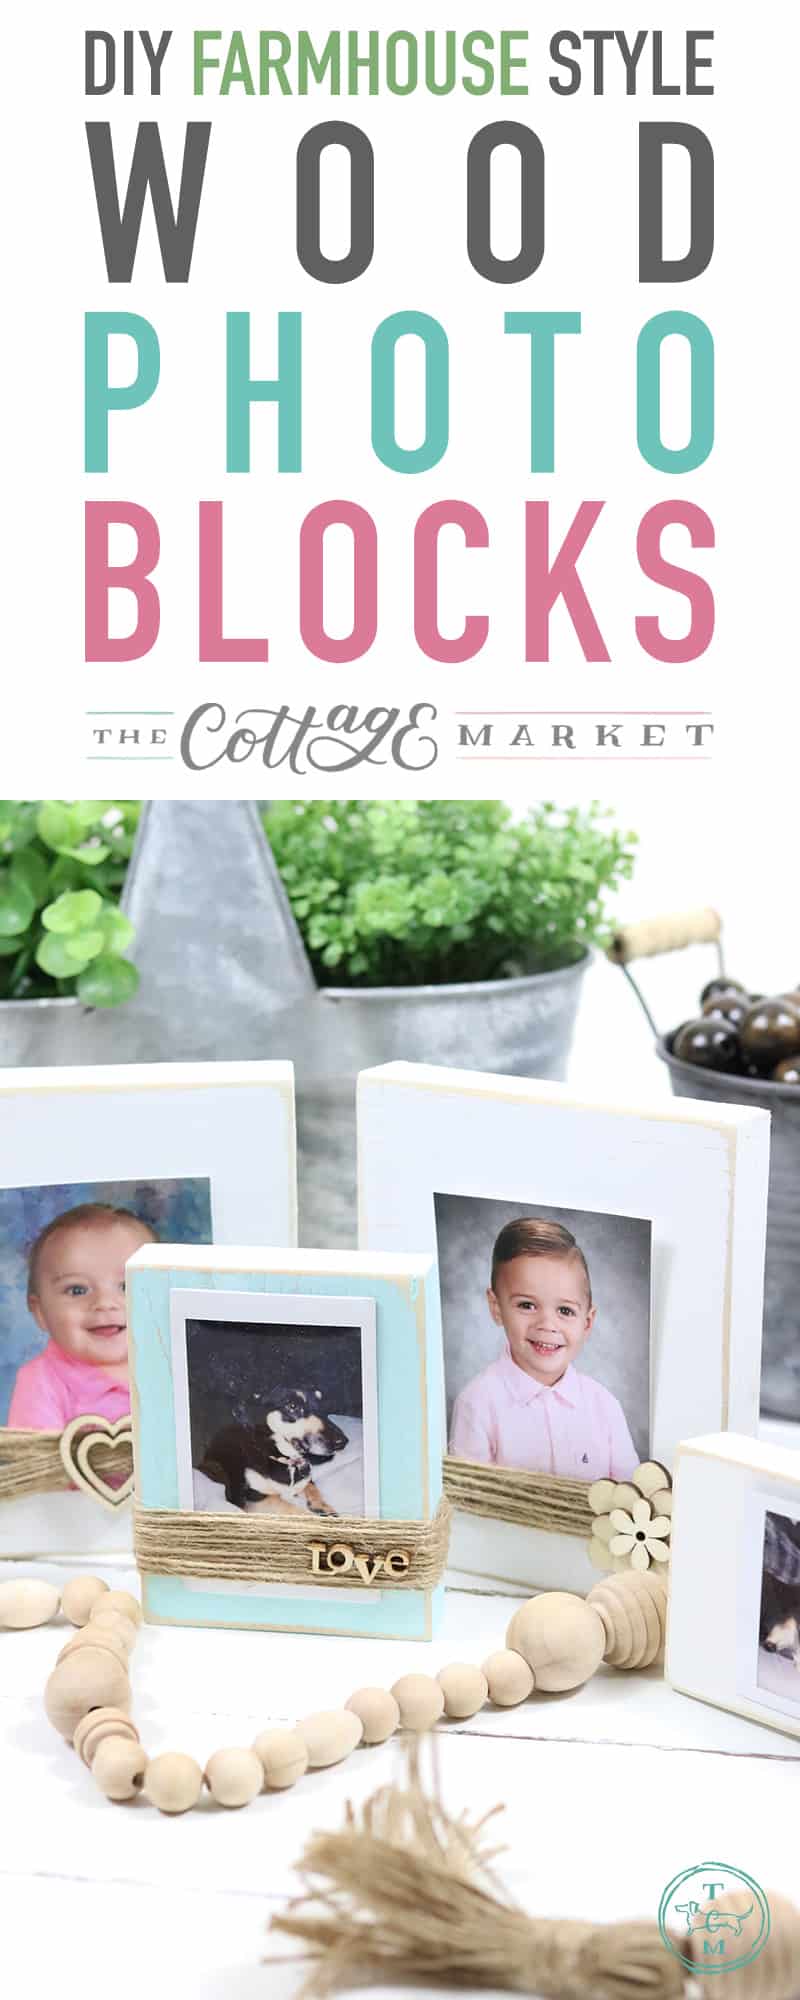 These Diy Farmhouse Style Wood Photo Blocks are so very easy to make and truly look amazing!  You can make them in any color or stain... embellish them or not and you can change photos in a second... really!